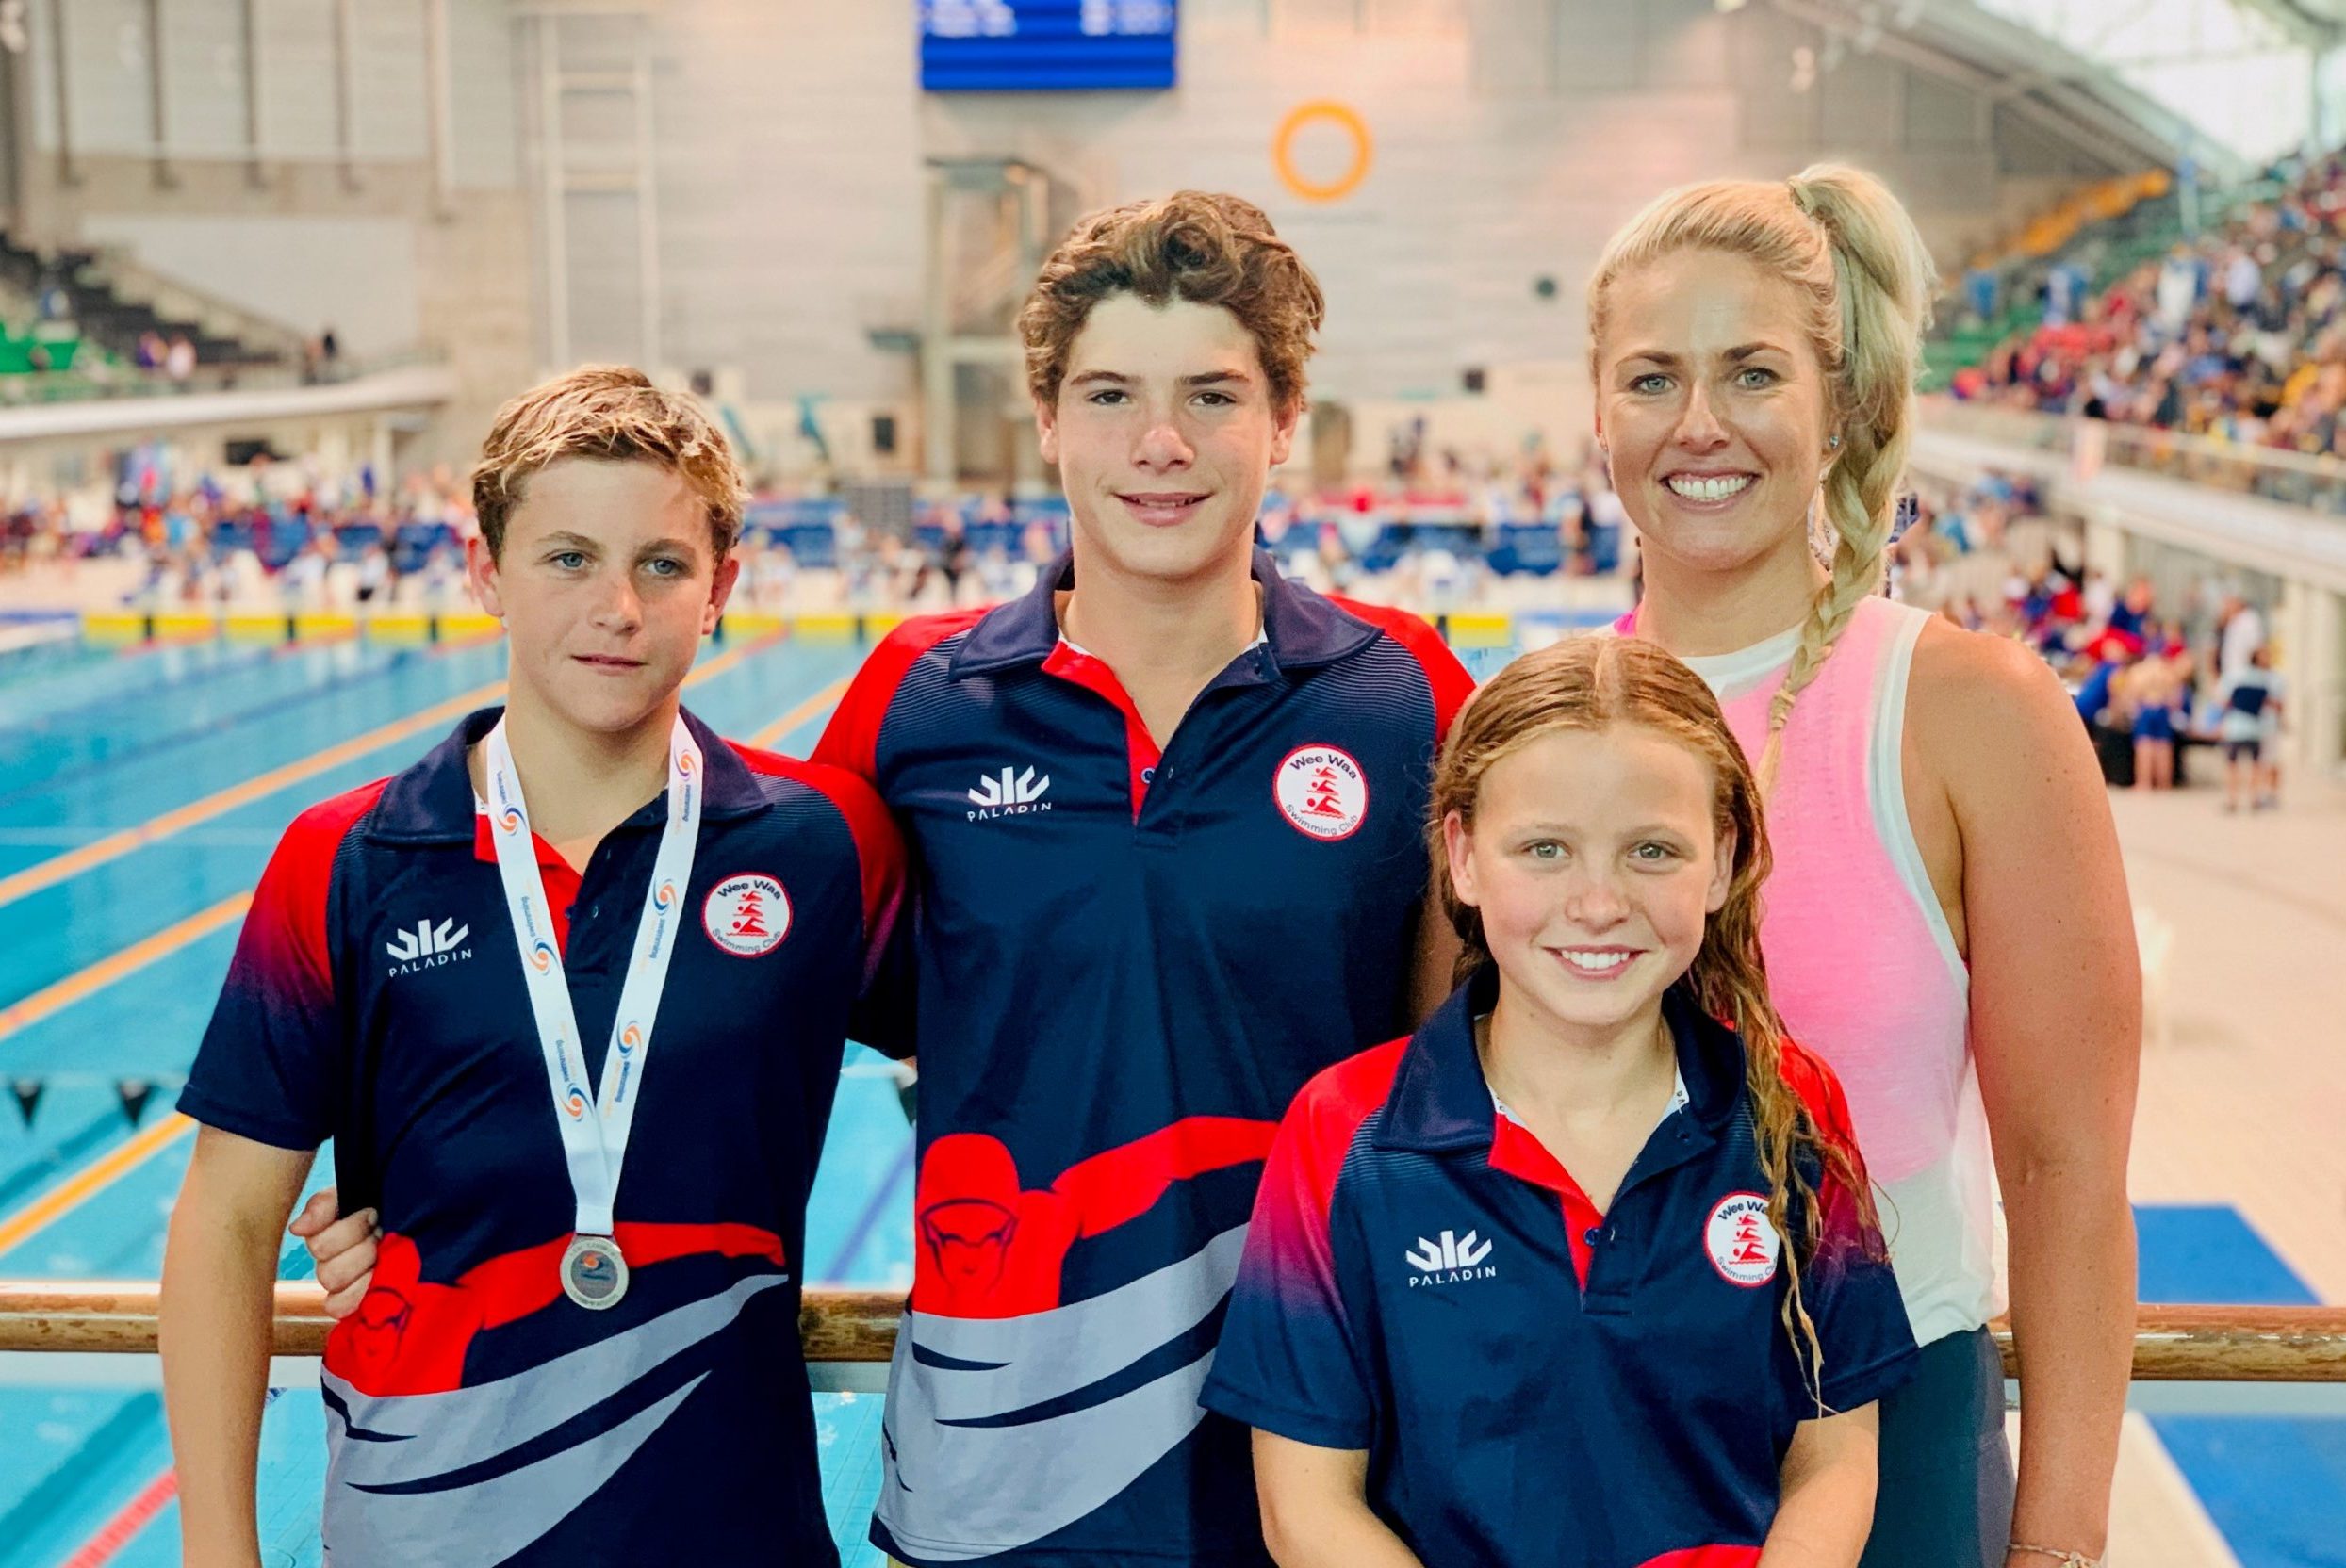 Karla’s Swim Team trio make their coach proud at Country Champs